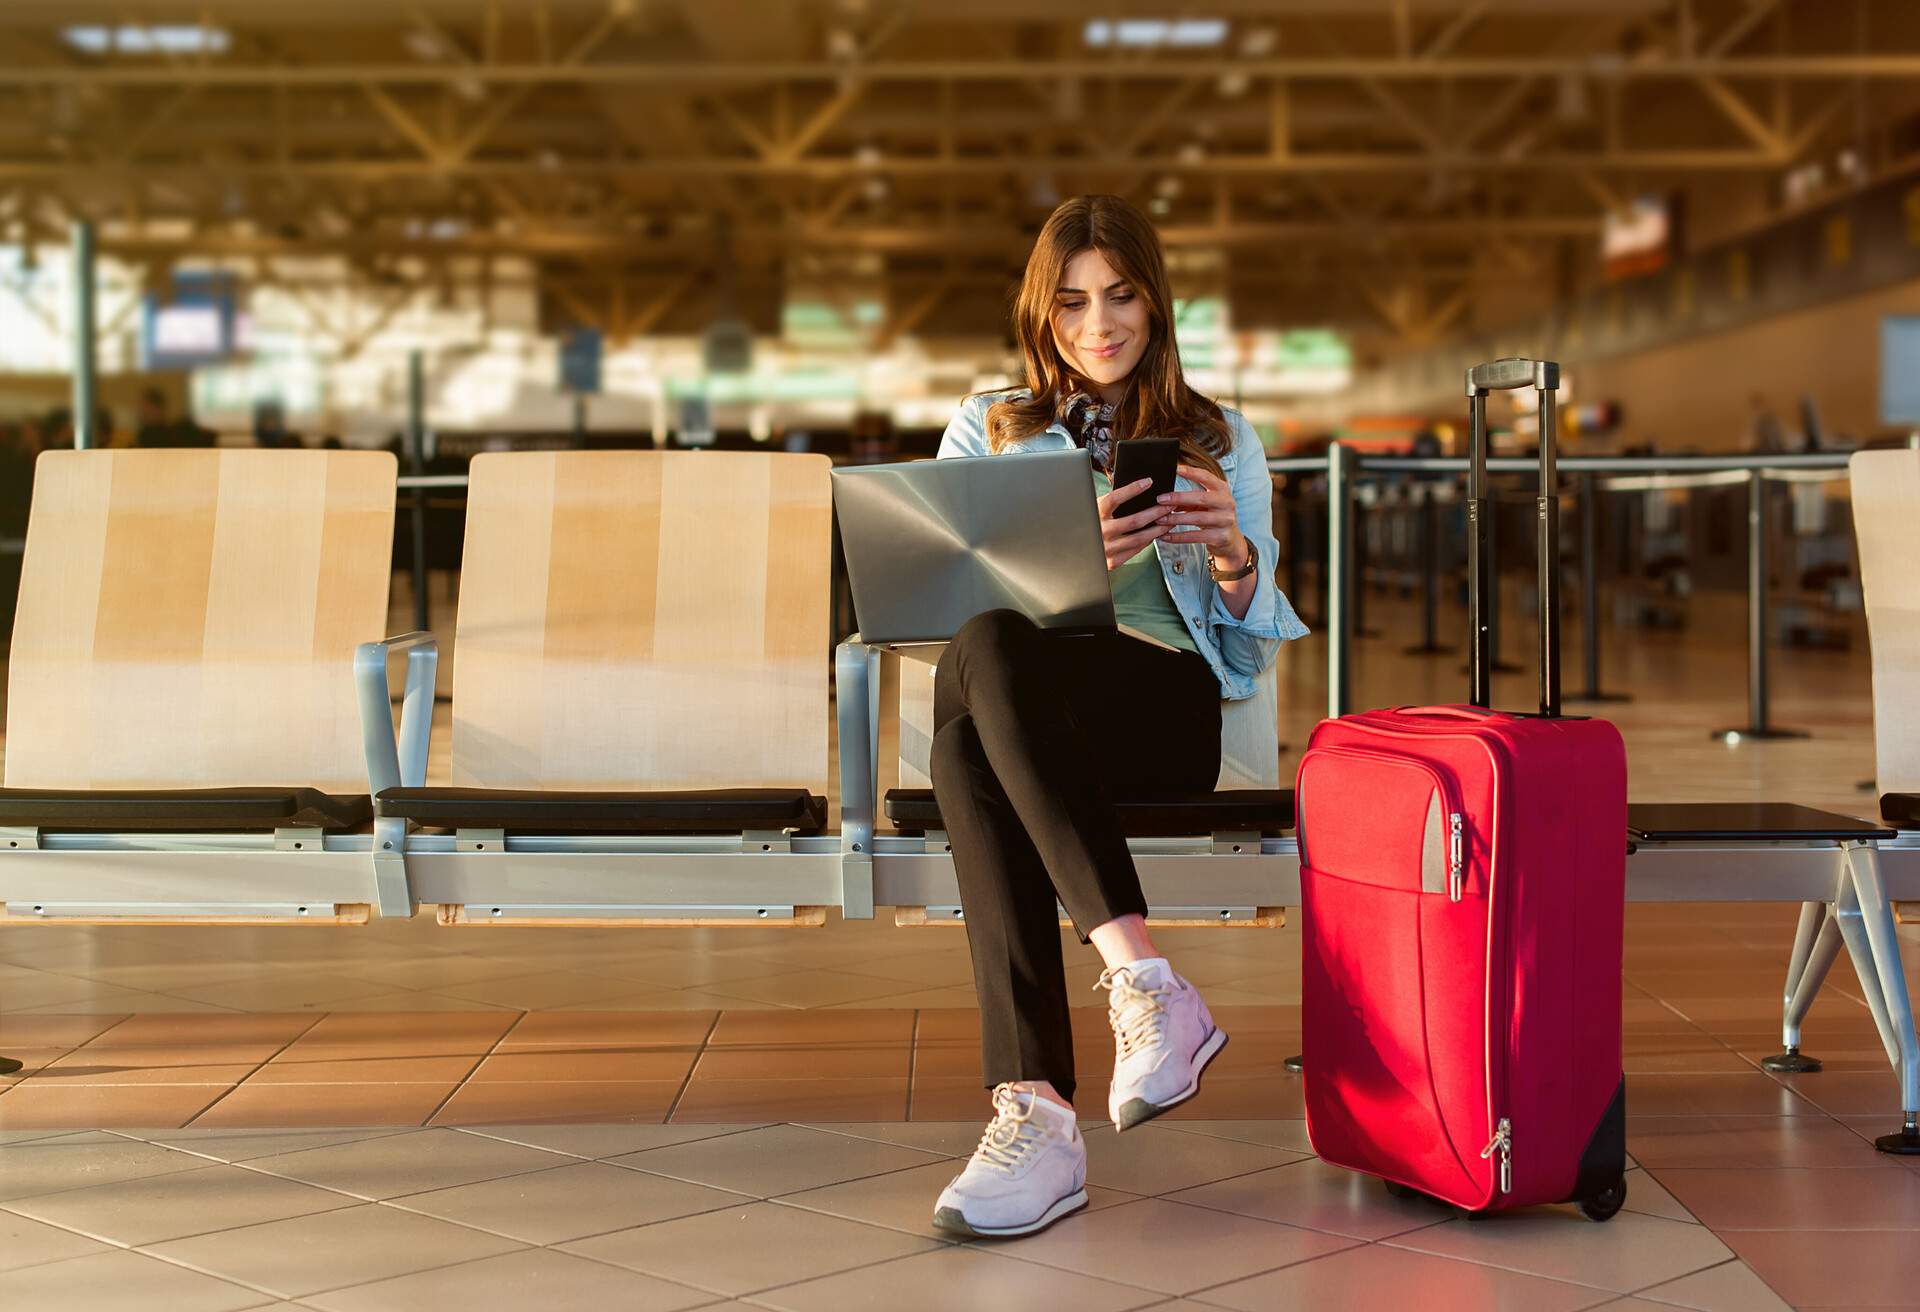 THEME_PERSON_AIRPORT_TRAVEL_AIRPORT-TERMINAL_WAITING_LAPTOP_LUGGAGE_SUITCASE_MOBILE-DEVICE-shutterstock-portfolio_655431676-1.jpg